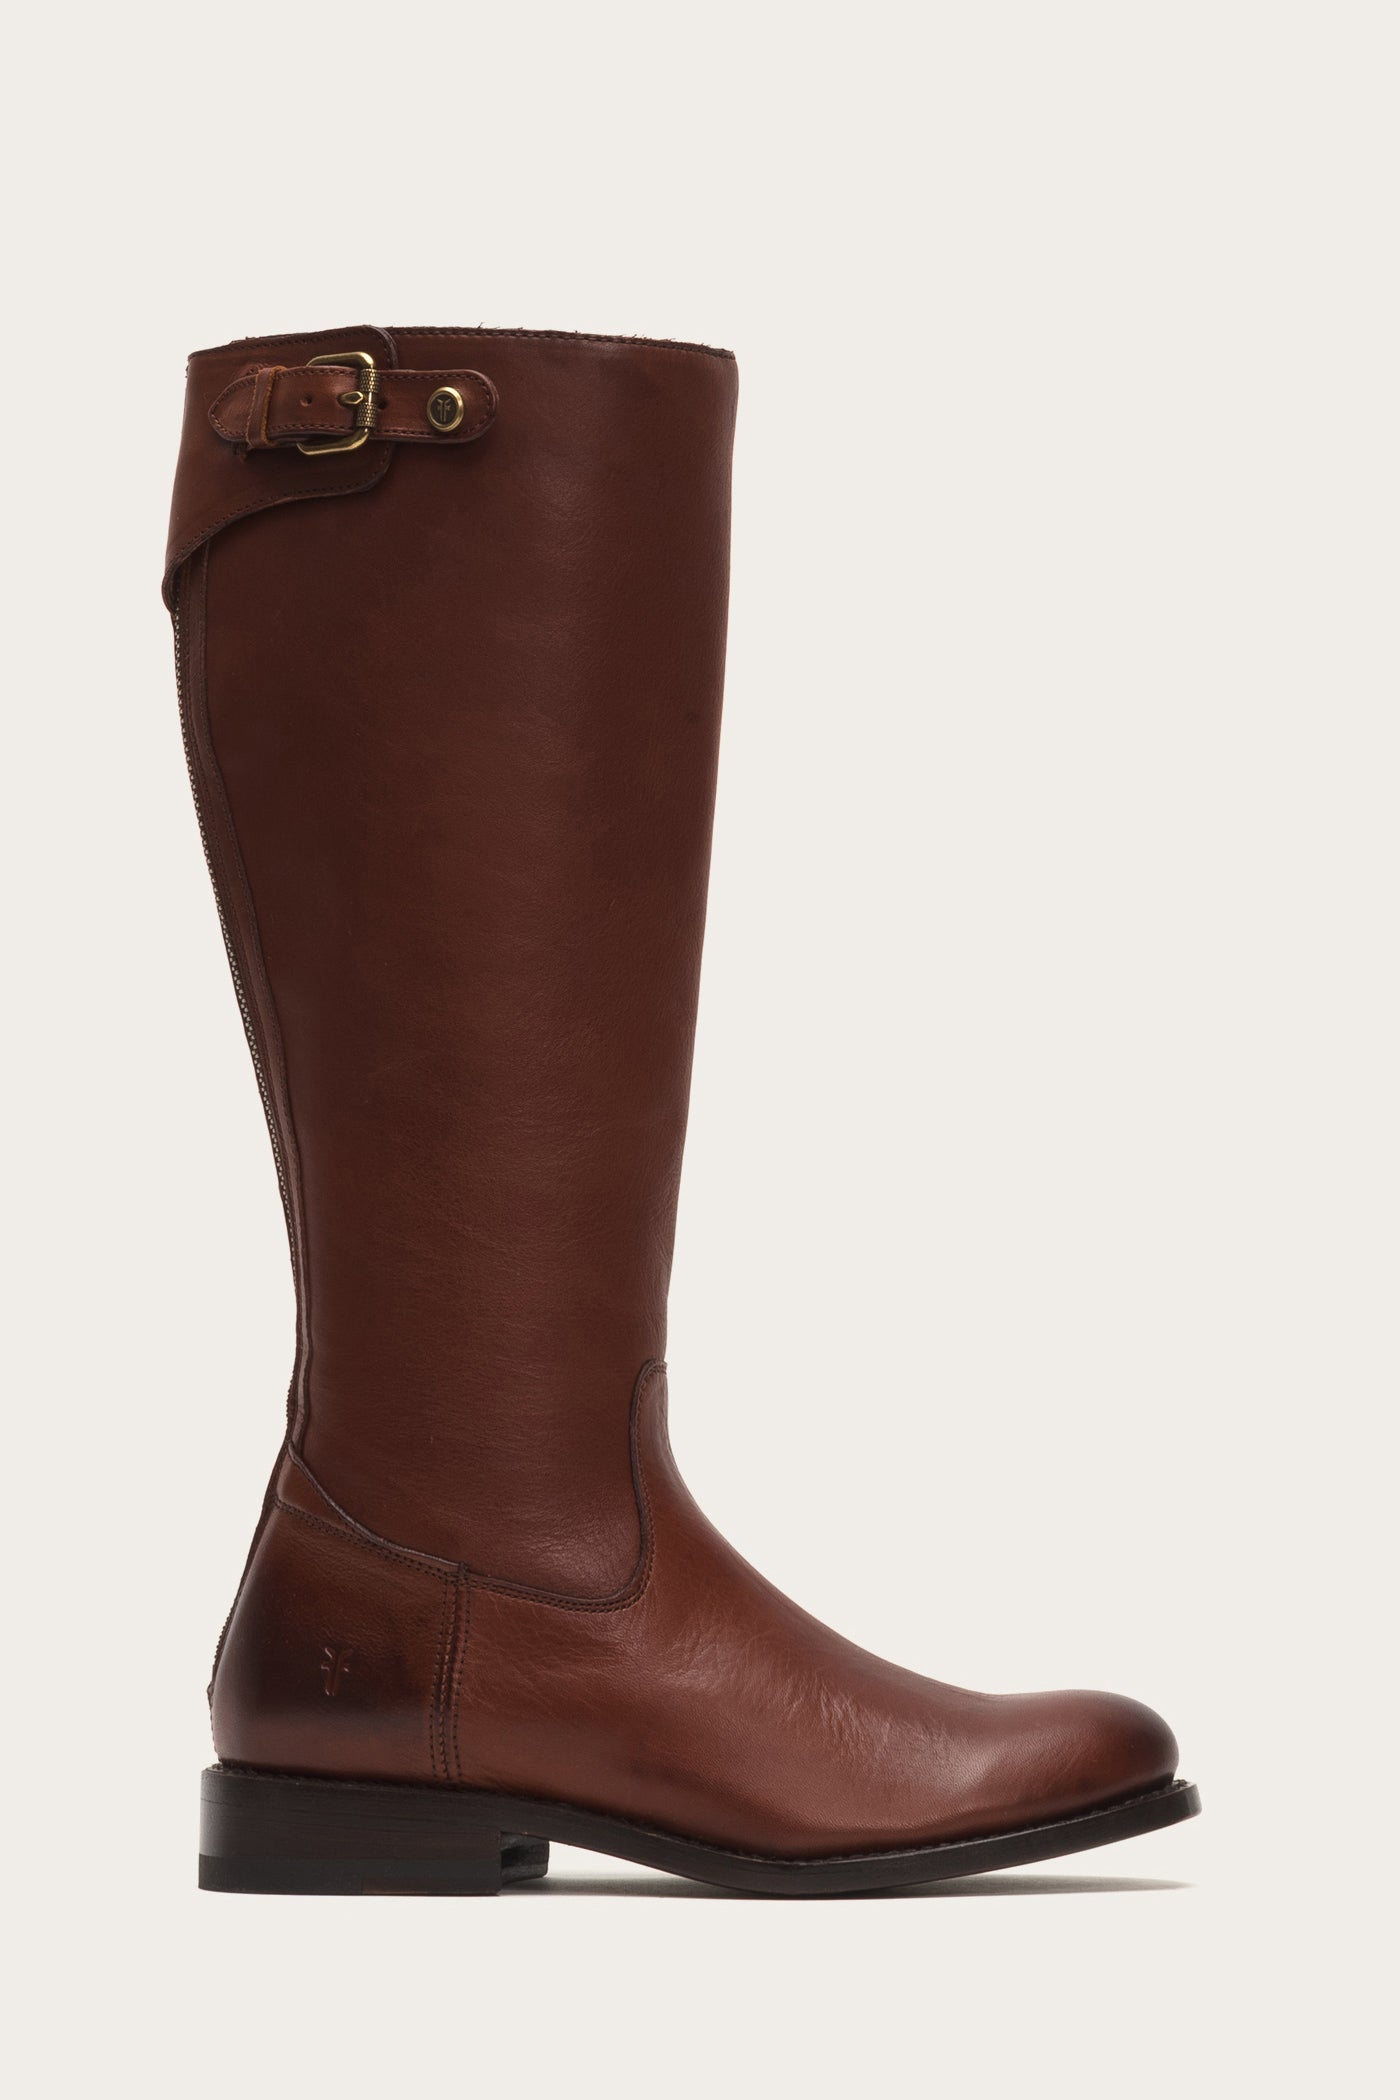 oxblood chelsea boots womens